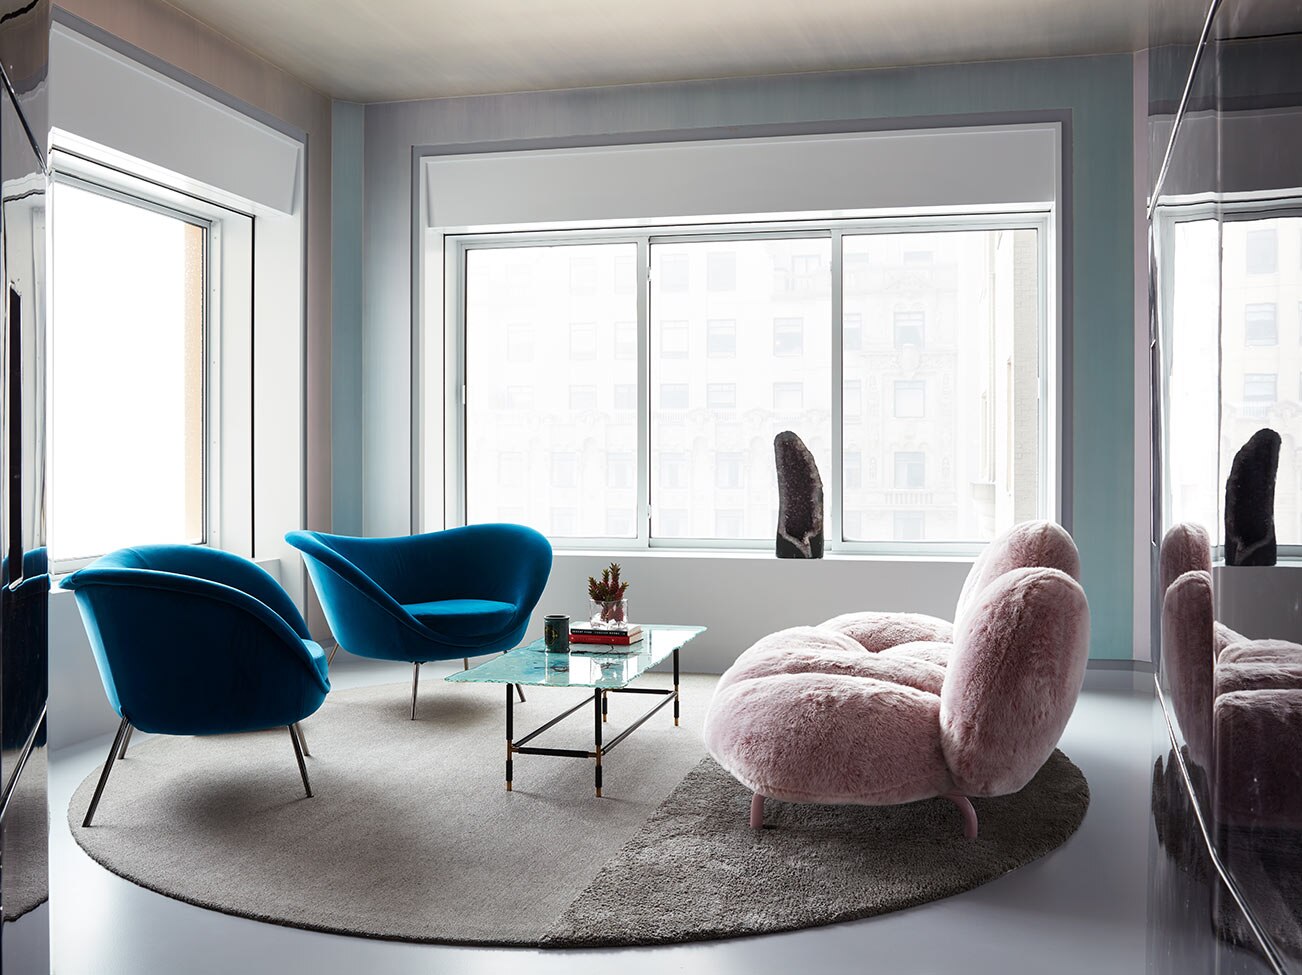 Corner sitting room with windows, light blue painted walls, contemporary furniture, natural light, and circular rug.